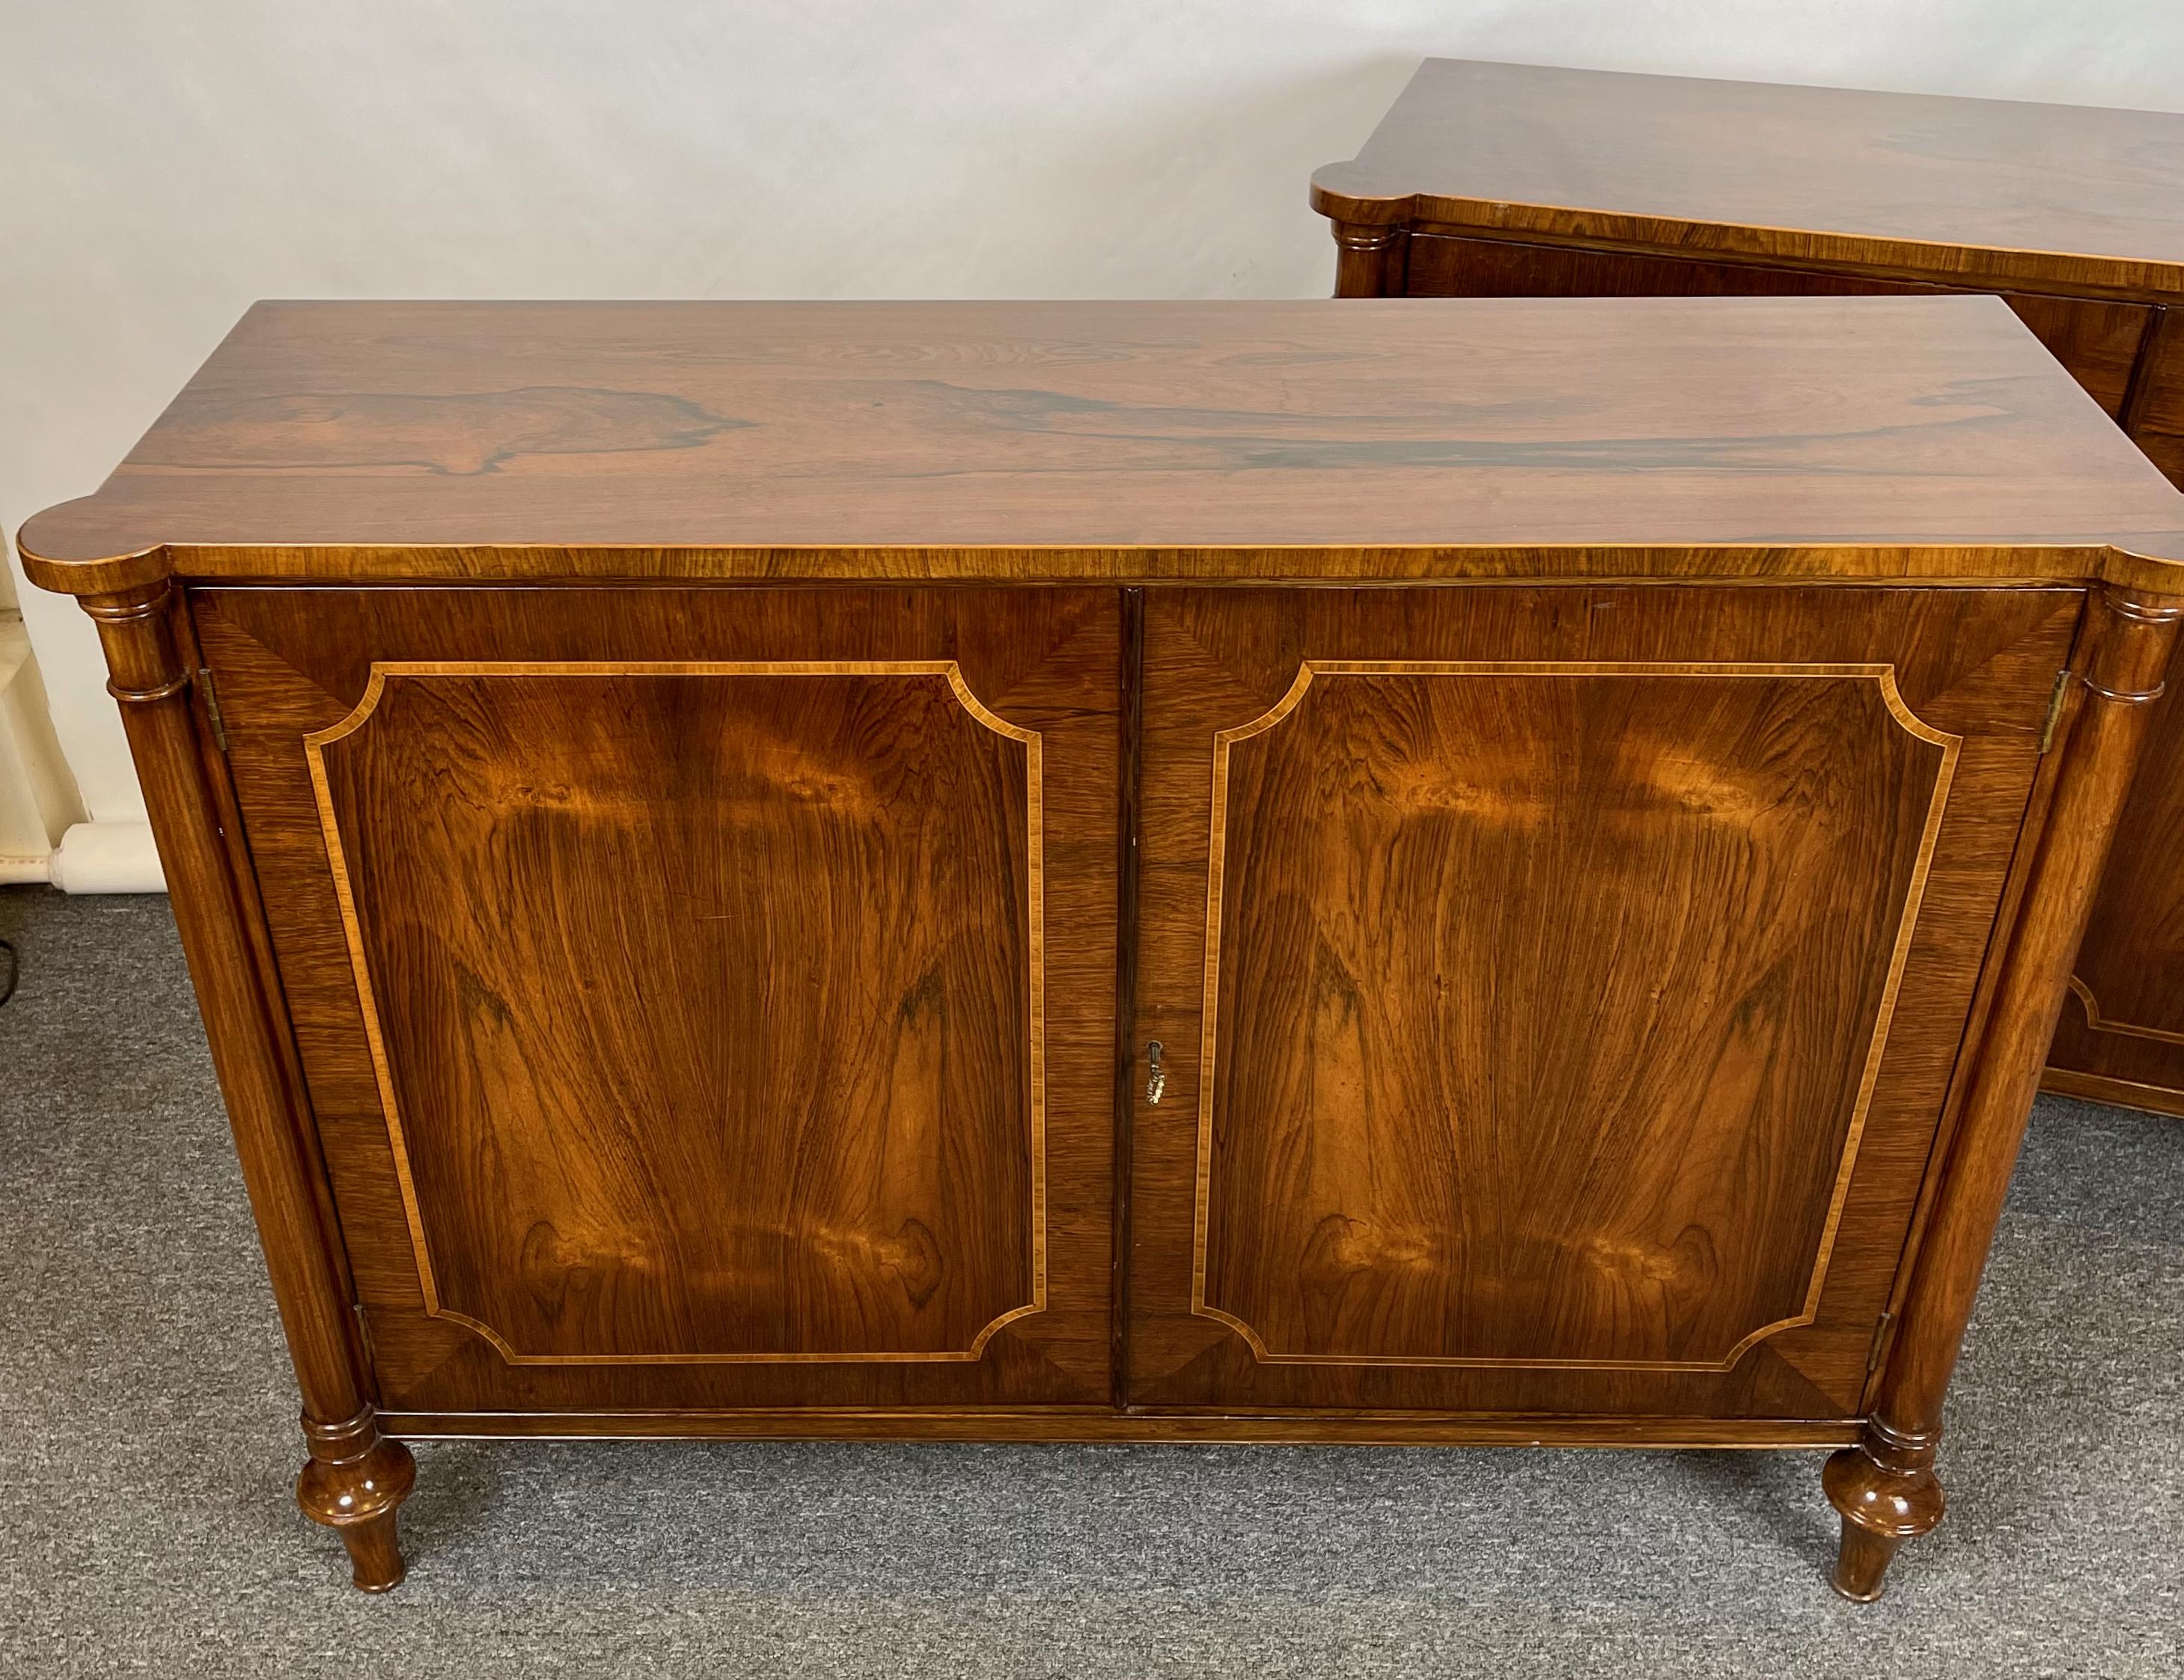 Hand-Crafted Pair of Regency Style Rosewood Cabinets